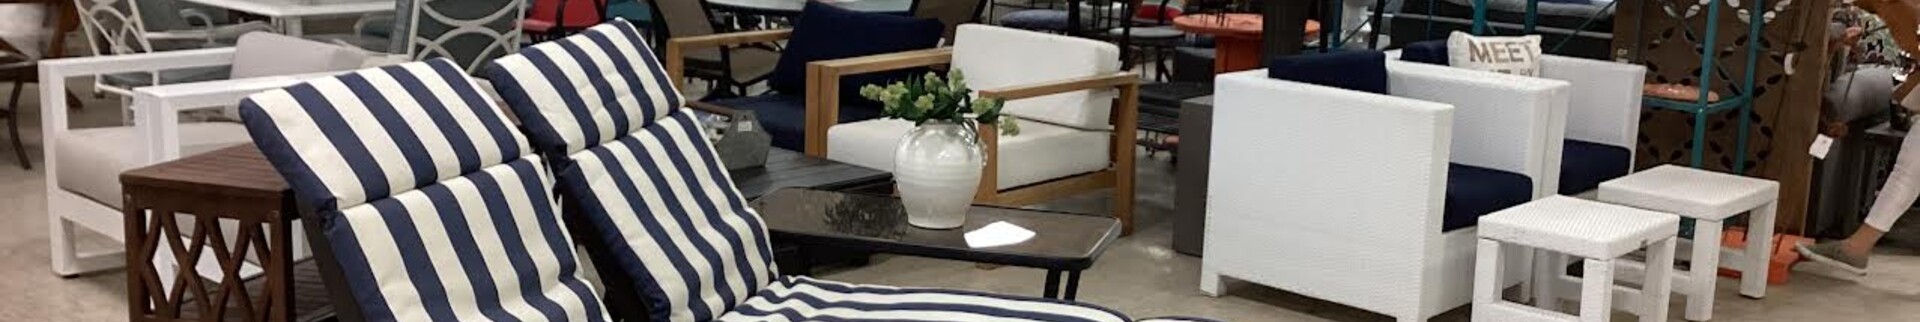 Chic & Cozy Consignment Furniture's banner image.